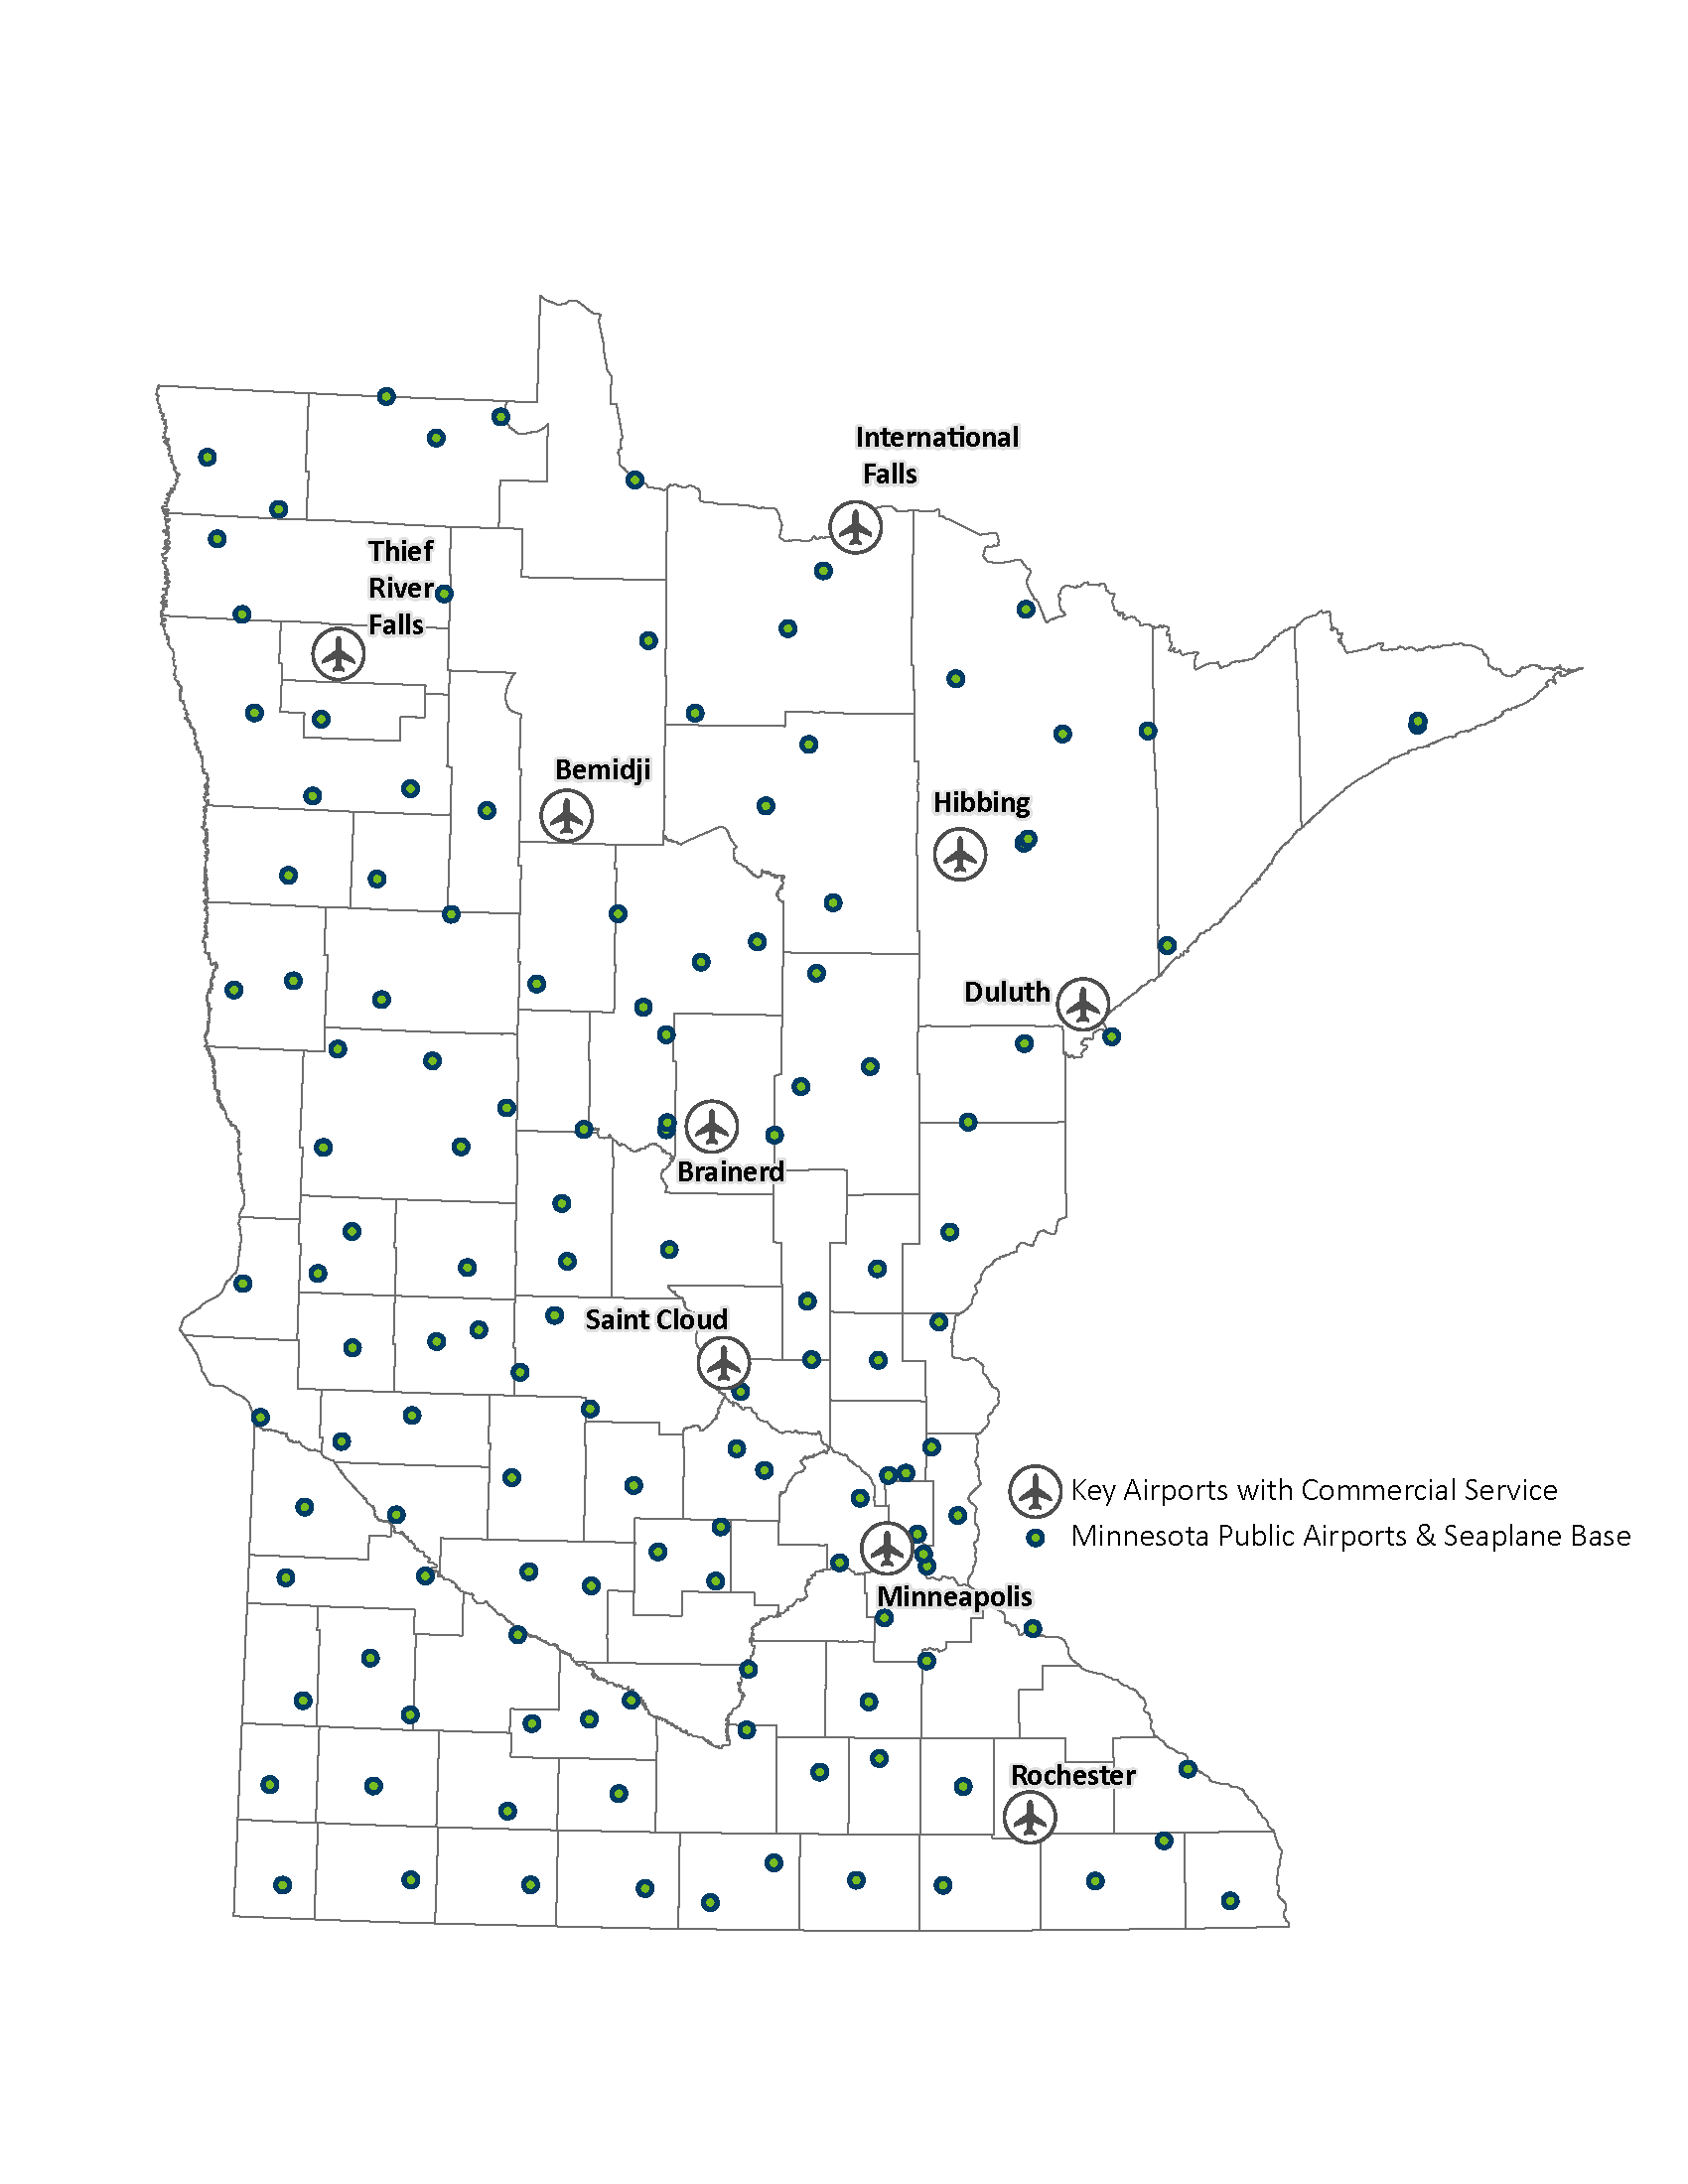 Map of airports throughout Minnesota